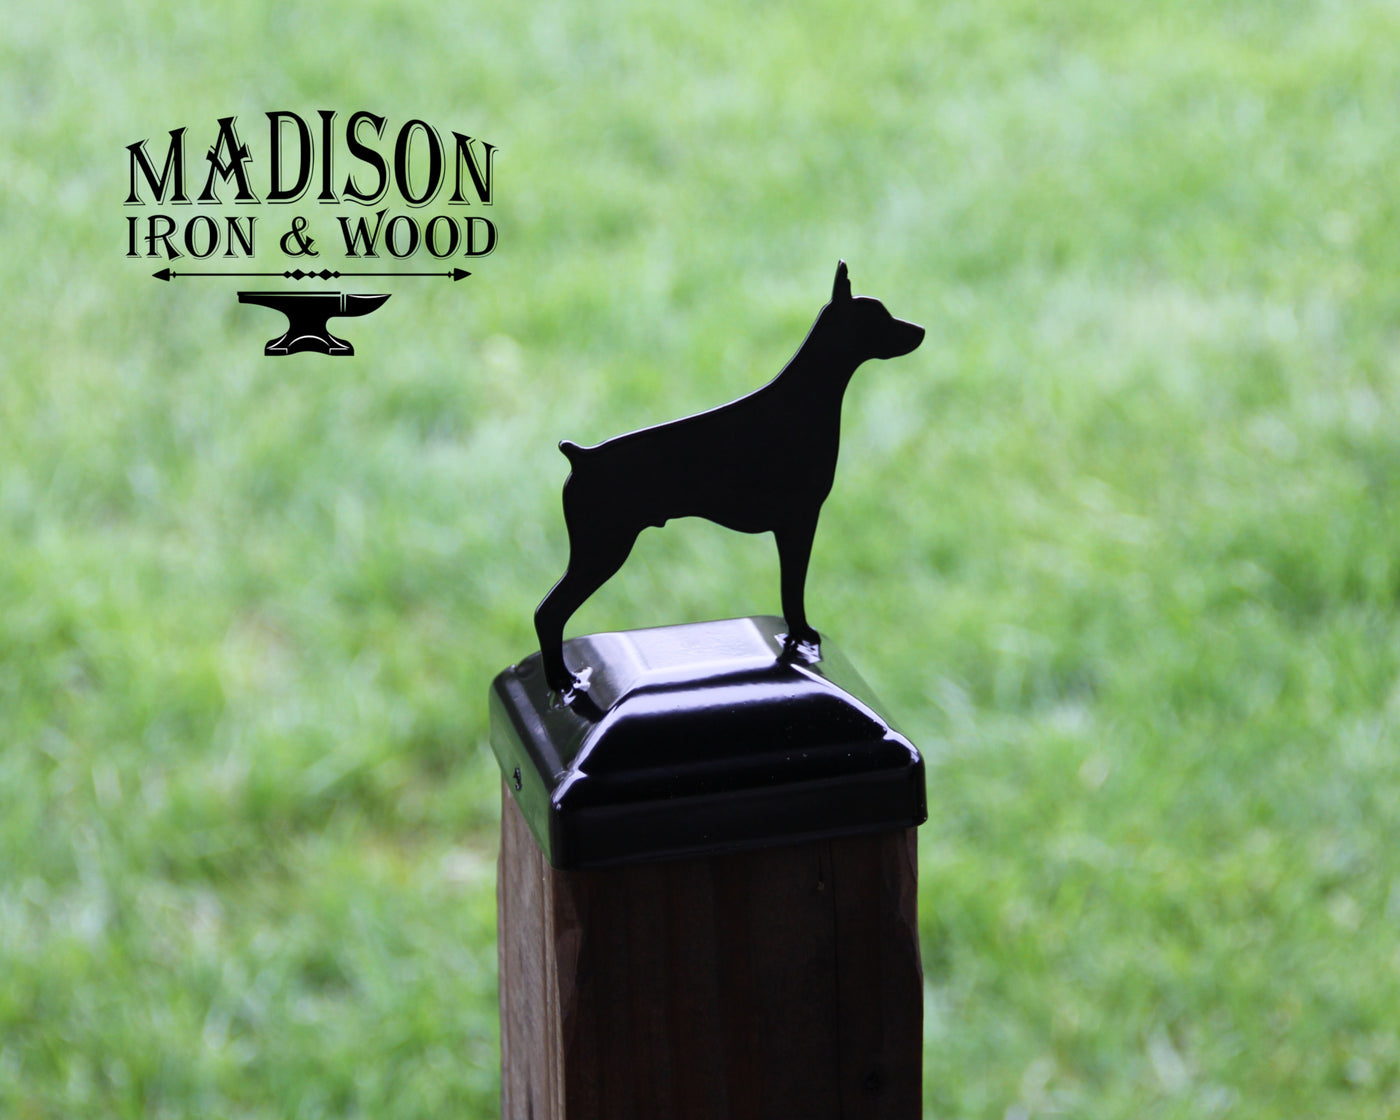 4x4 Dobermann Pinscher Post Cap - Madison Iron and Wood - Post Cap - metal outdoor decor - Steel deocrations - american made products - veteran owned business products - fencing decorations - fencing supplies - custom wall decorations - personalized wall signs - steel - decorative post caps - steel post caps - metal post caps - brackets - structural brackets - home improvement - easter - easter decorations - easter gift - easter yard decor